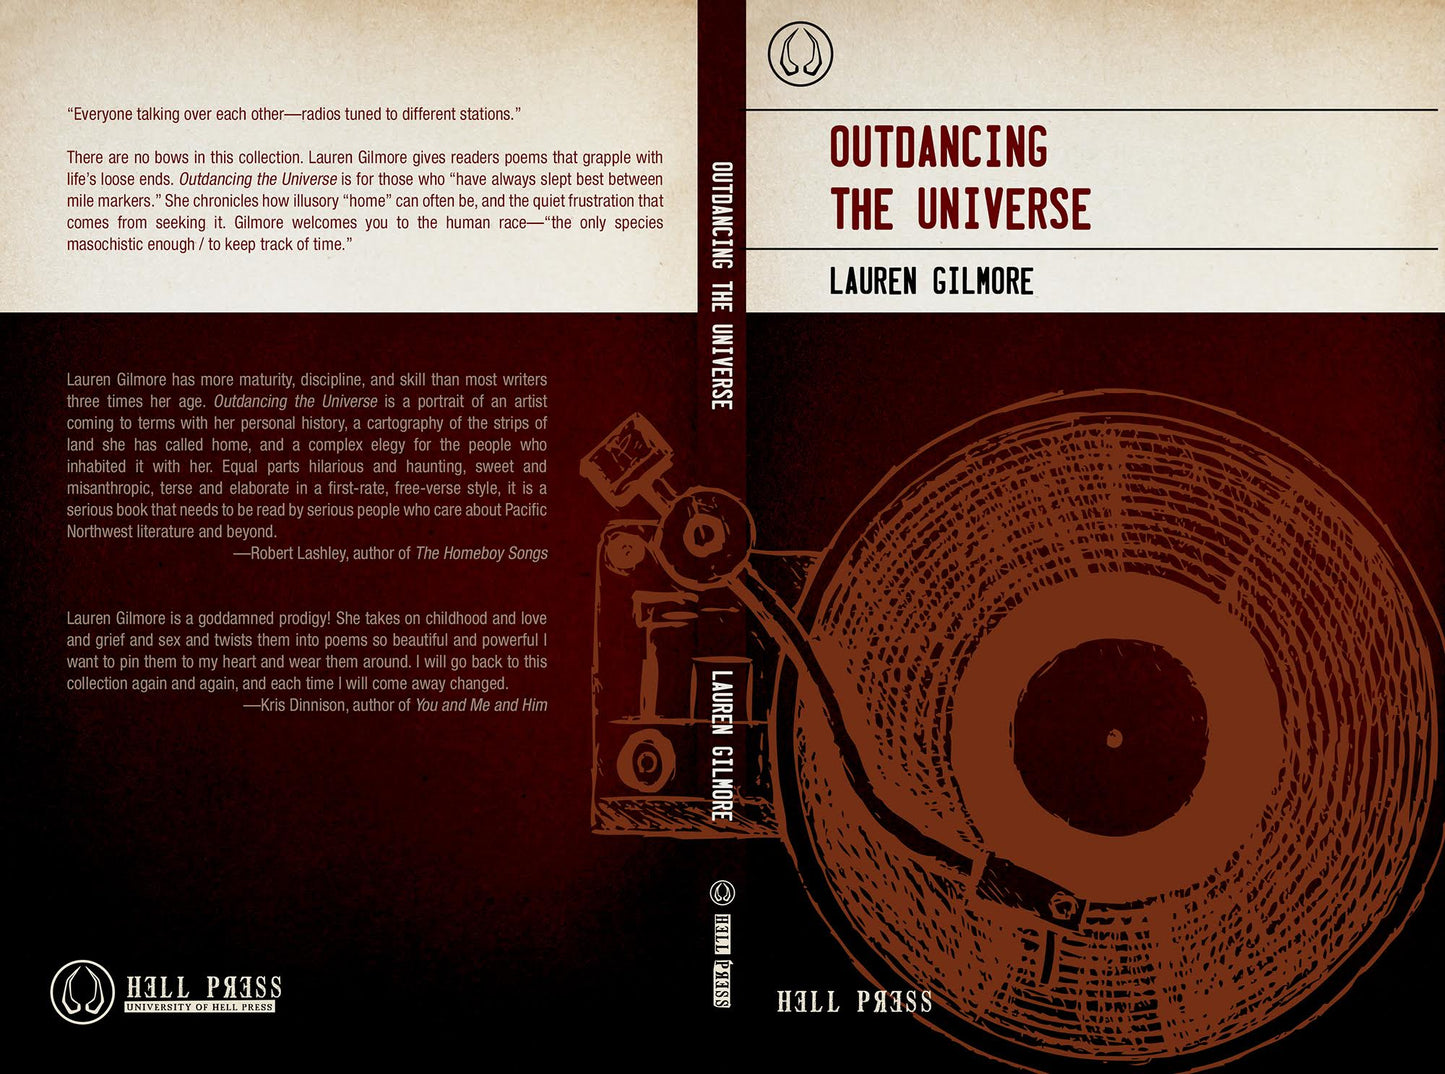 Outdancing the Universe by Lauren Gilmore